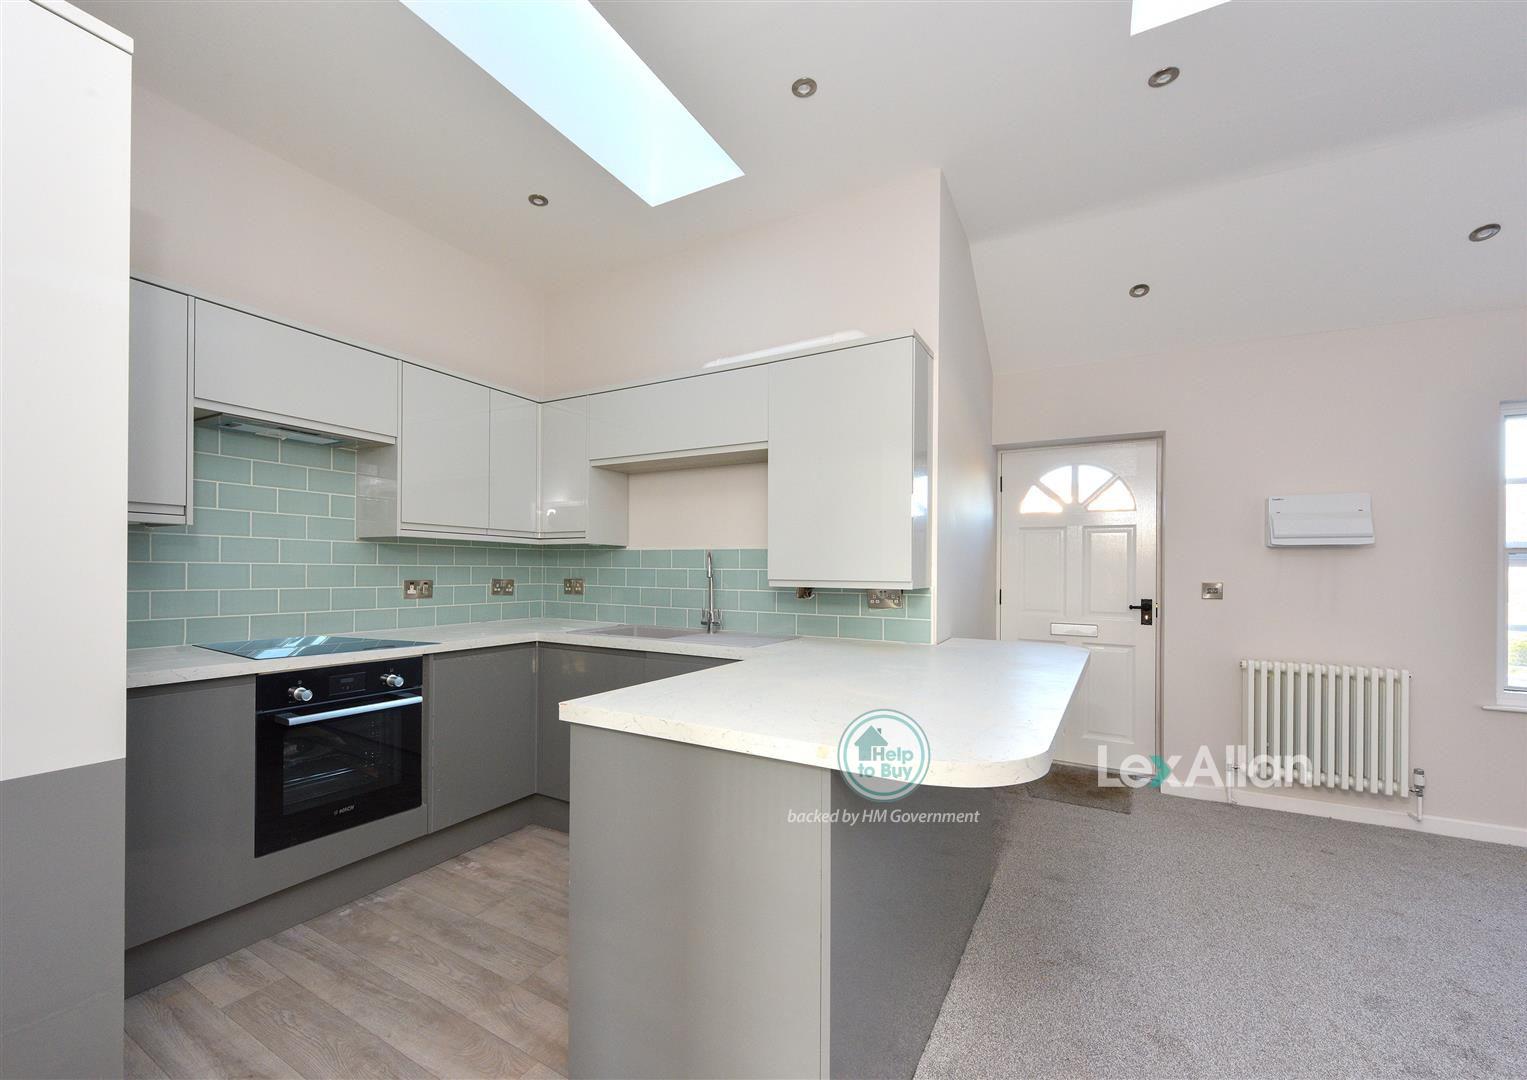 2 bed  for sale in Red Hill, Stourbridge, DY8 